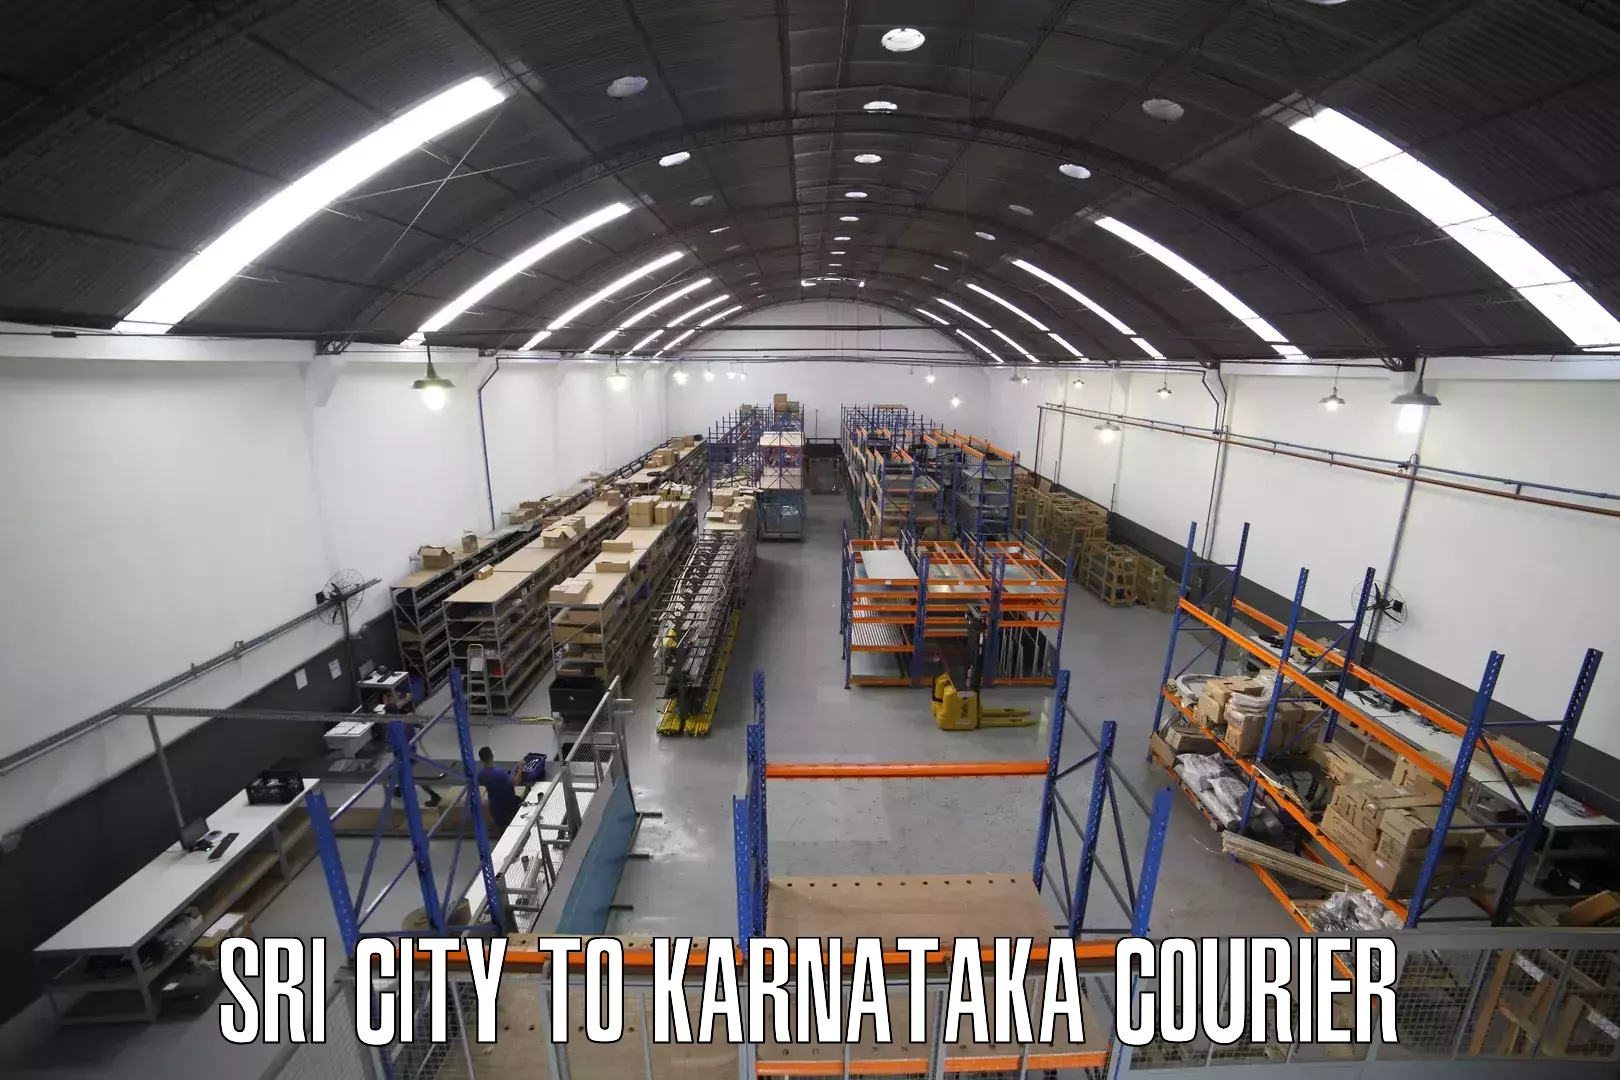 Return courier service Sri City to Dharmasthala